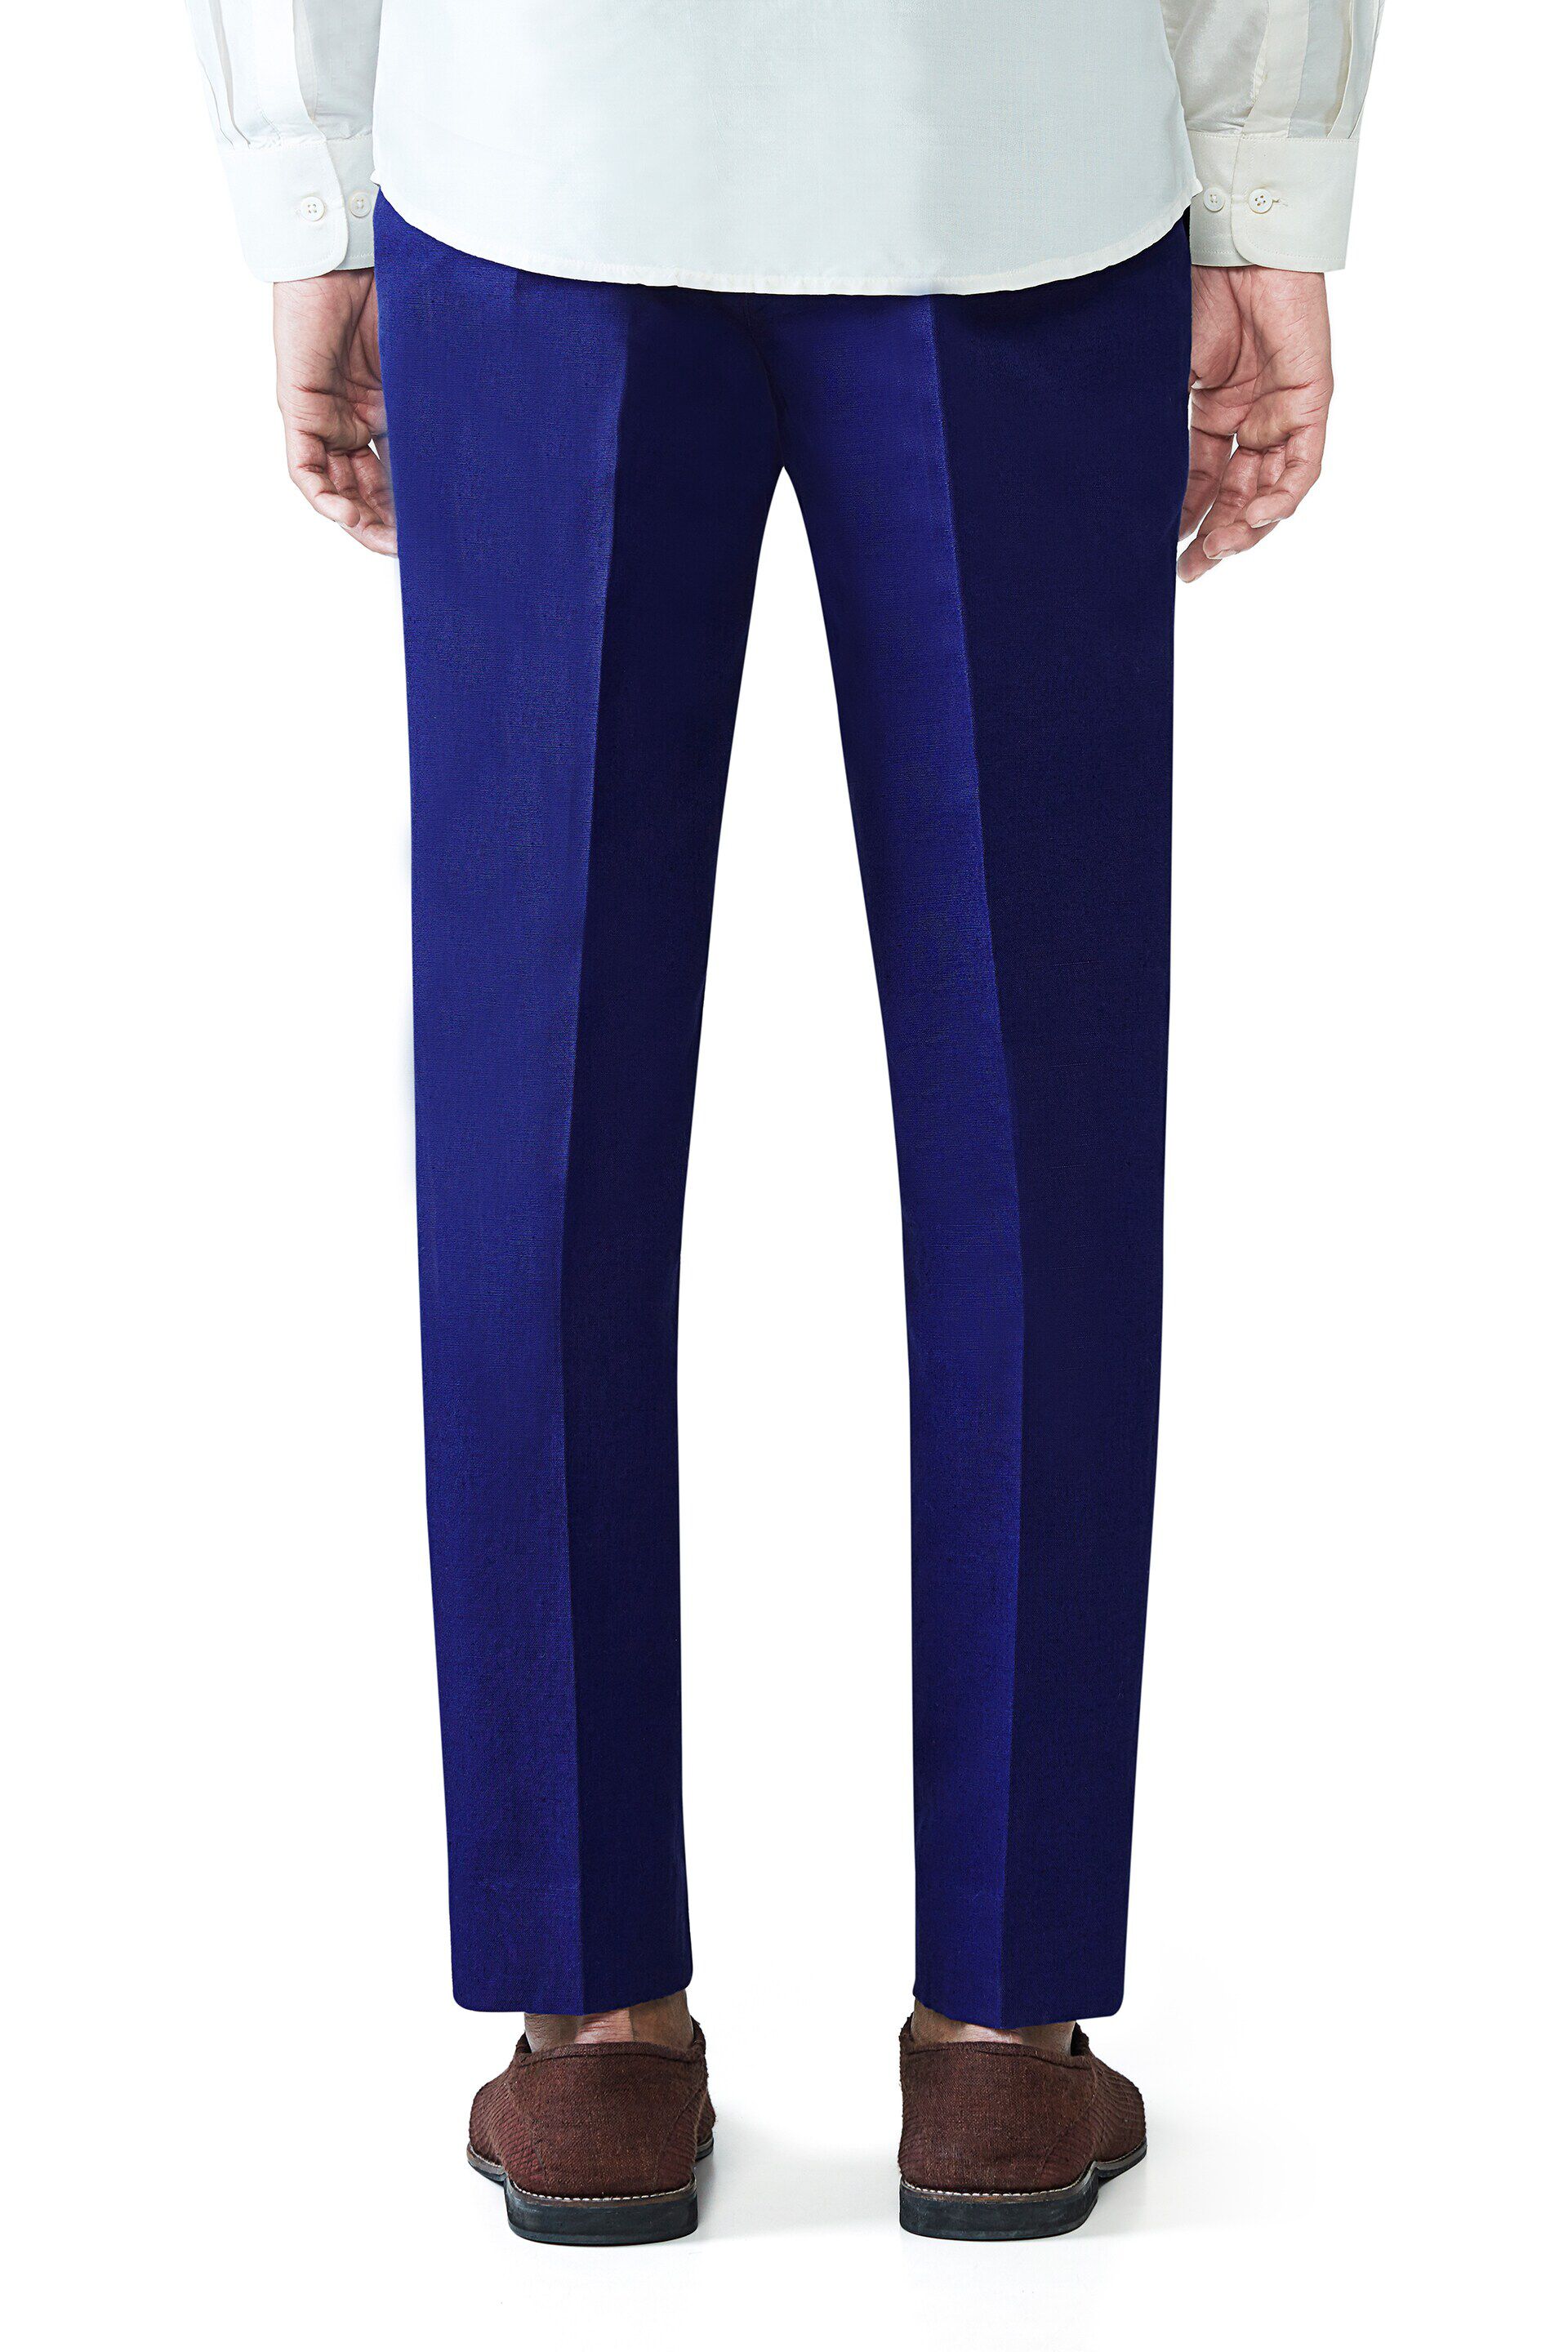 Cantabil Formal Trousers  Buy Cantabil Men Navy Blue Formal Trouser Online   Nykaa Fashion